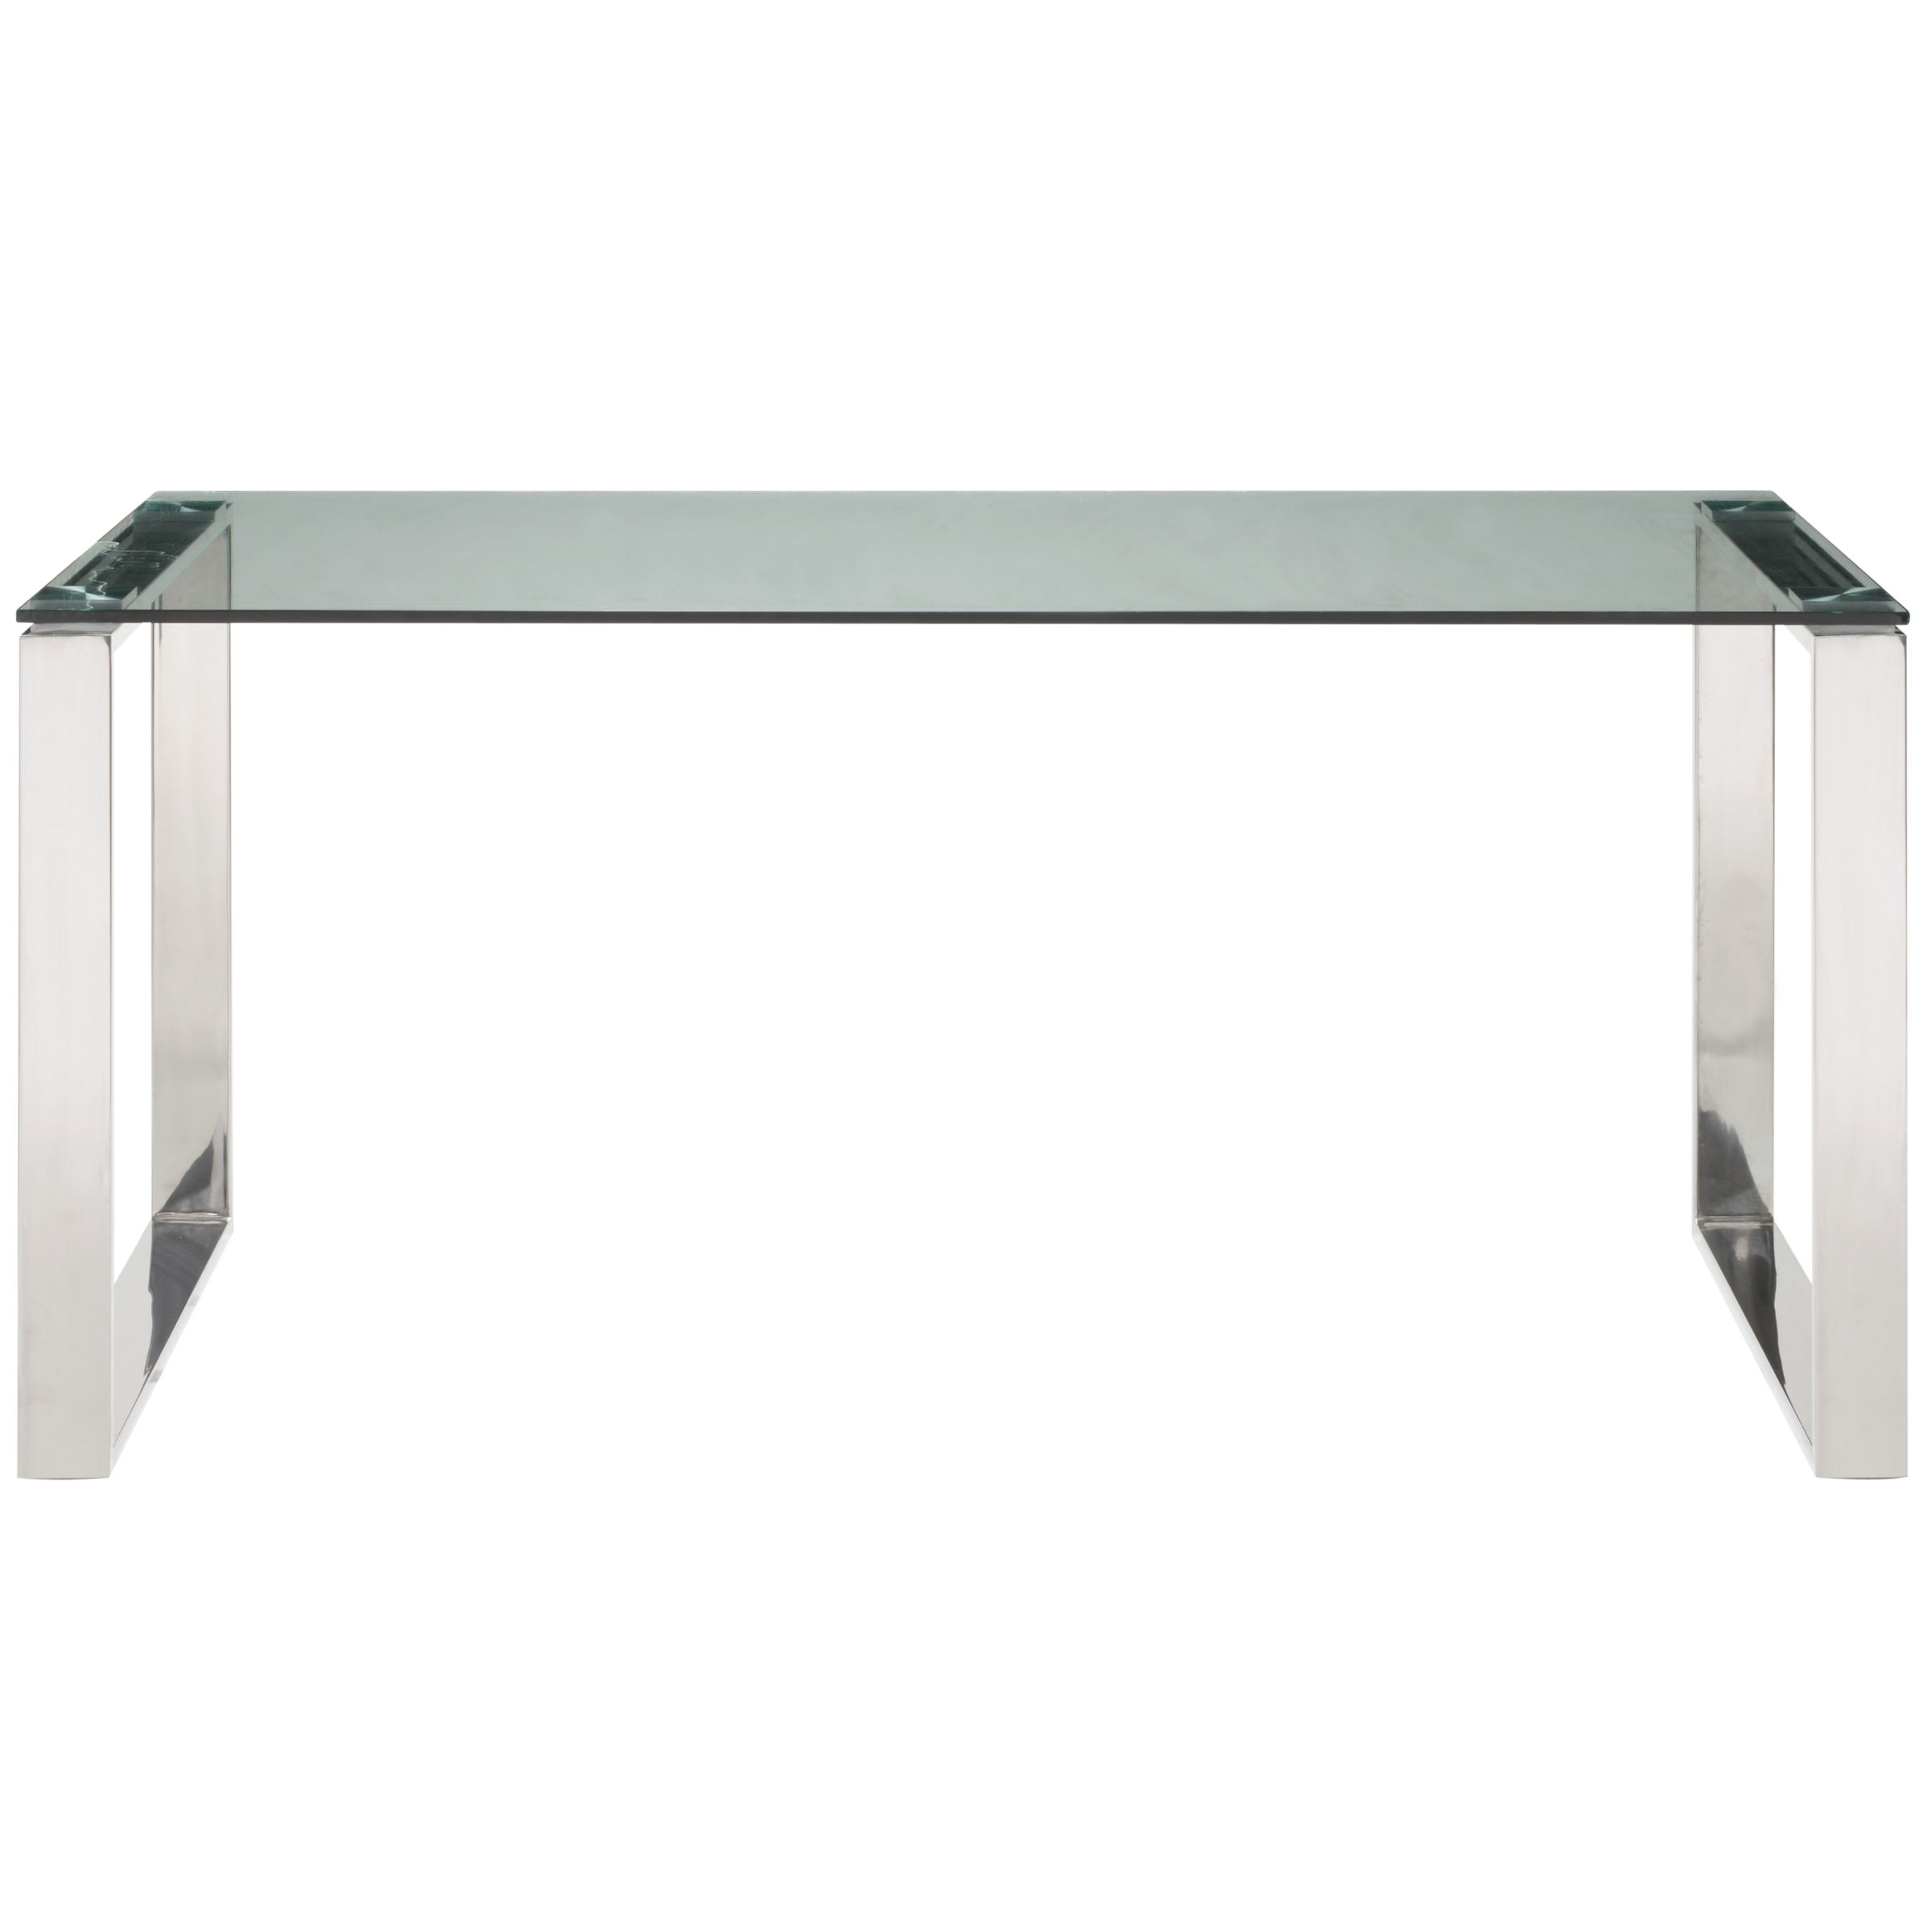 John Lewis Frost Dining Table